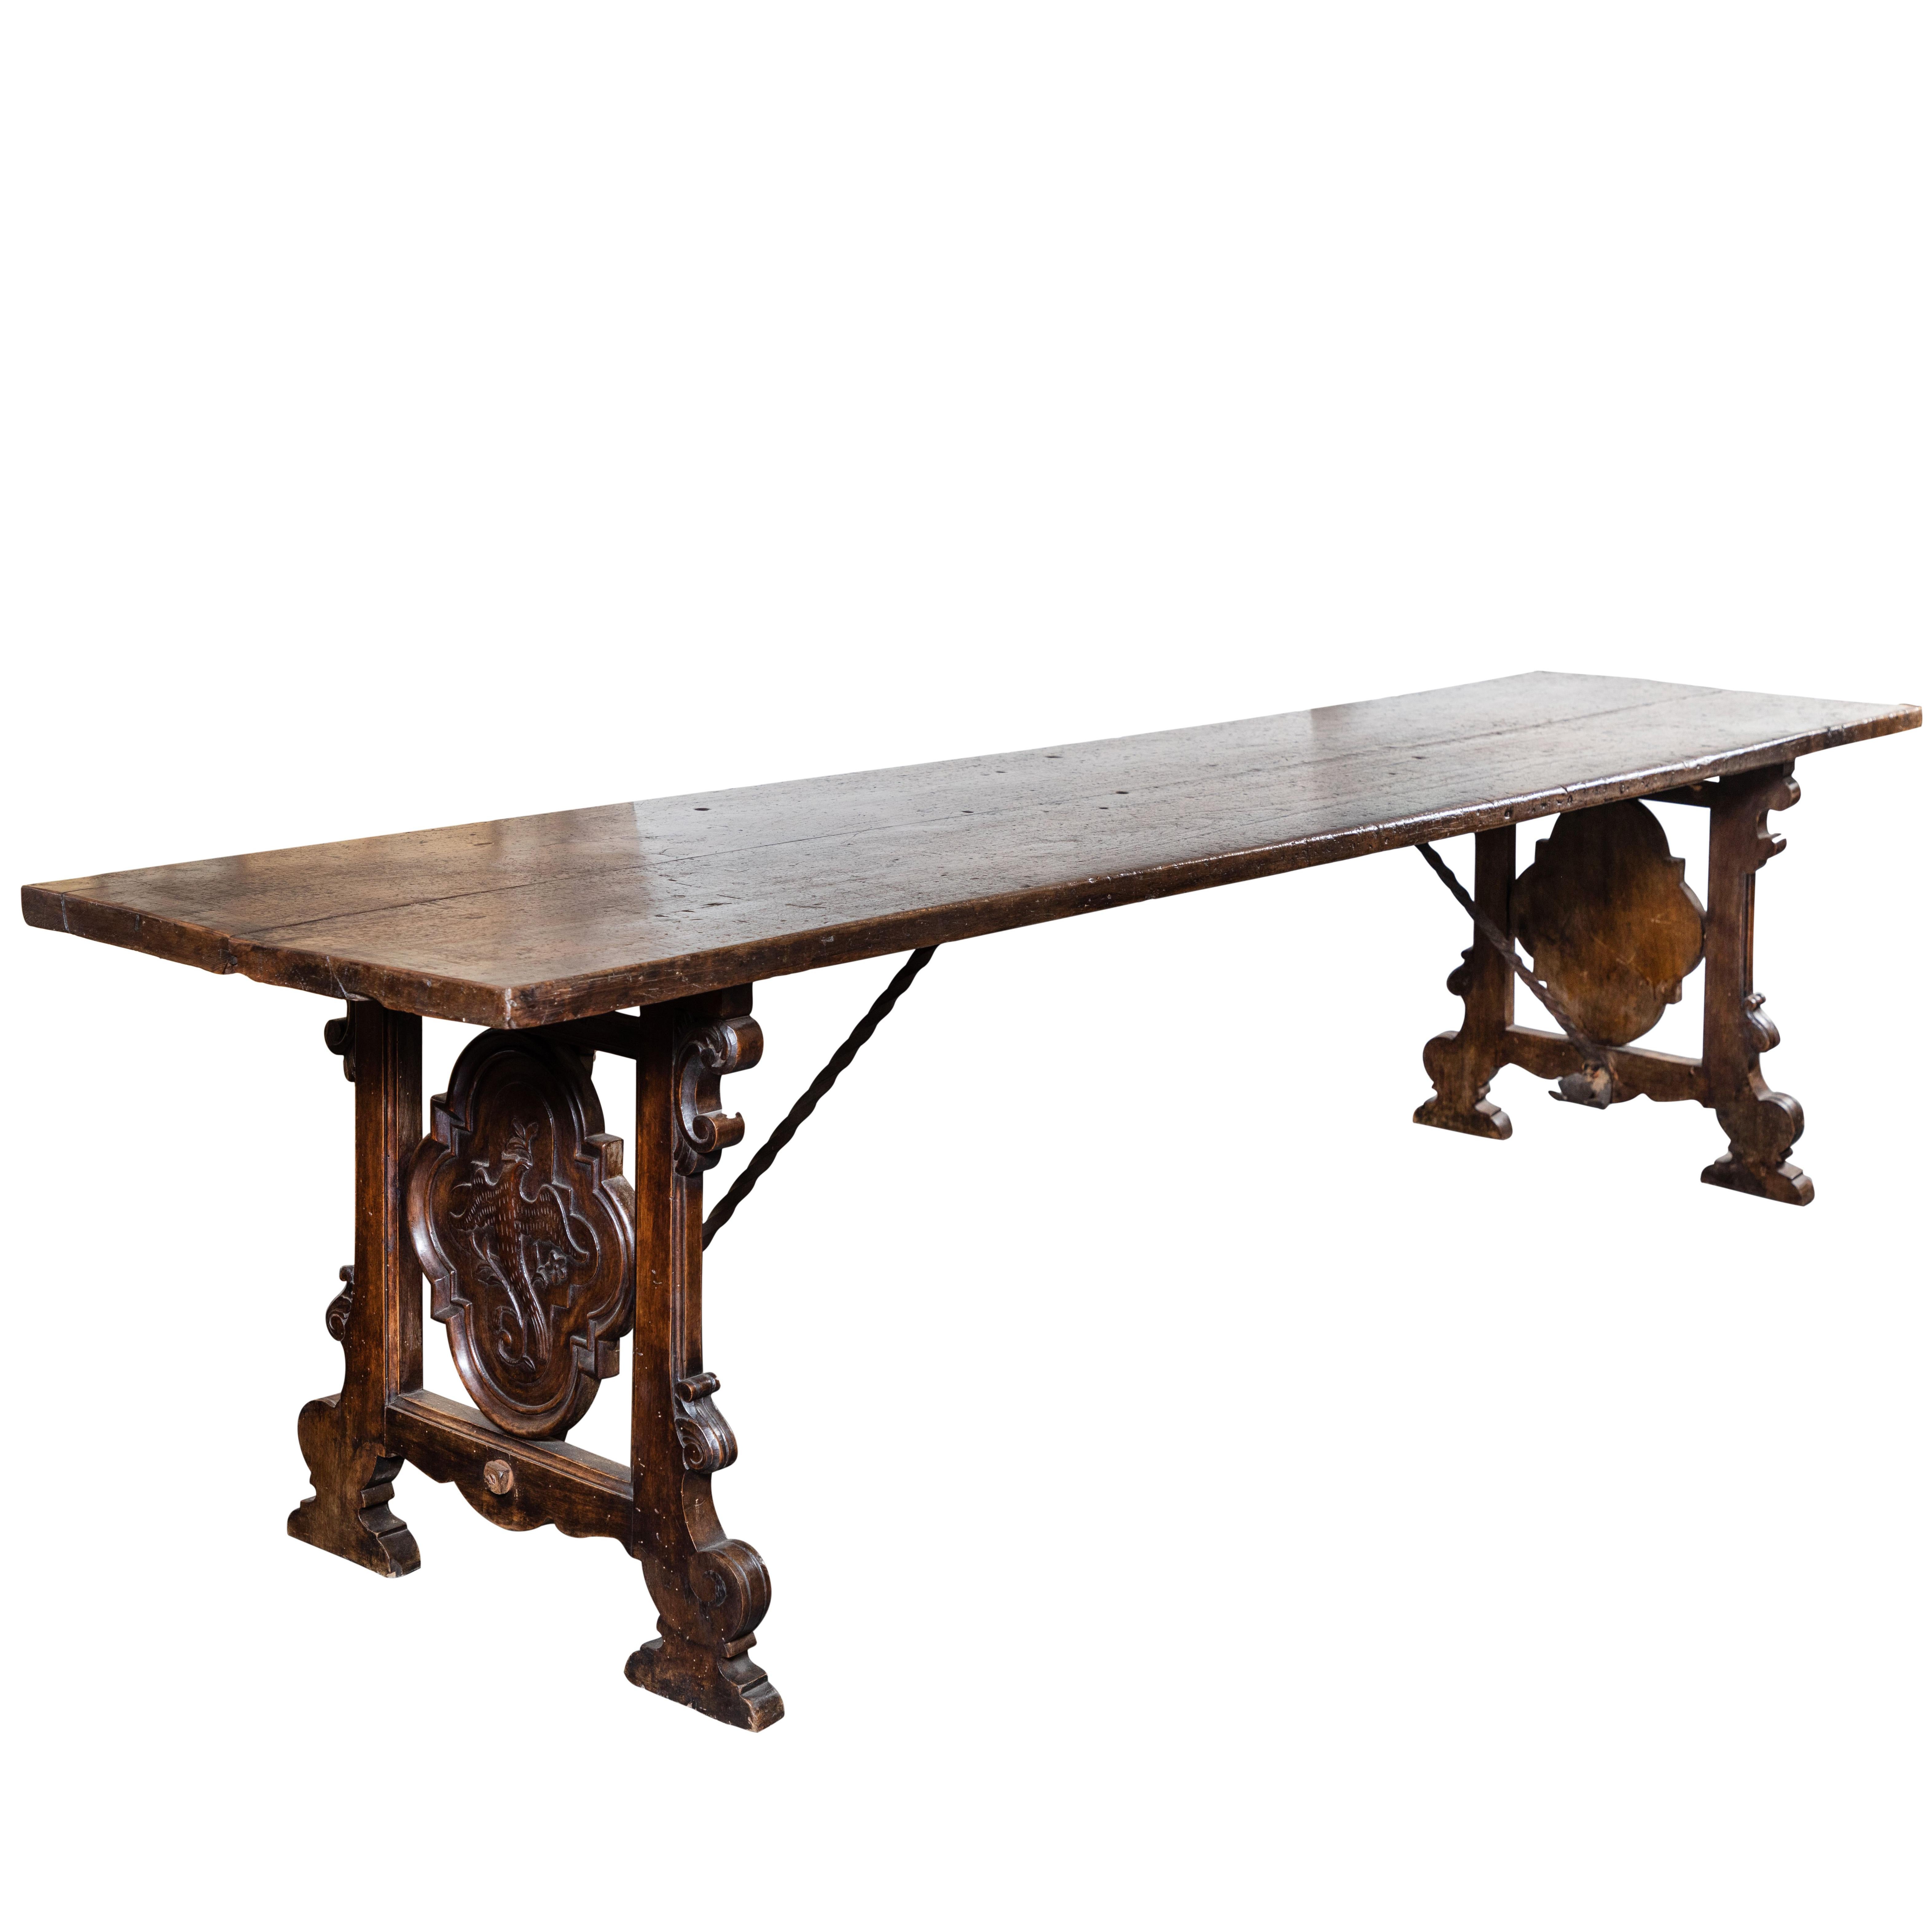 Italian Refractory Table with Unique Carvings, circa 1900